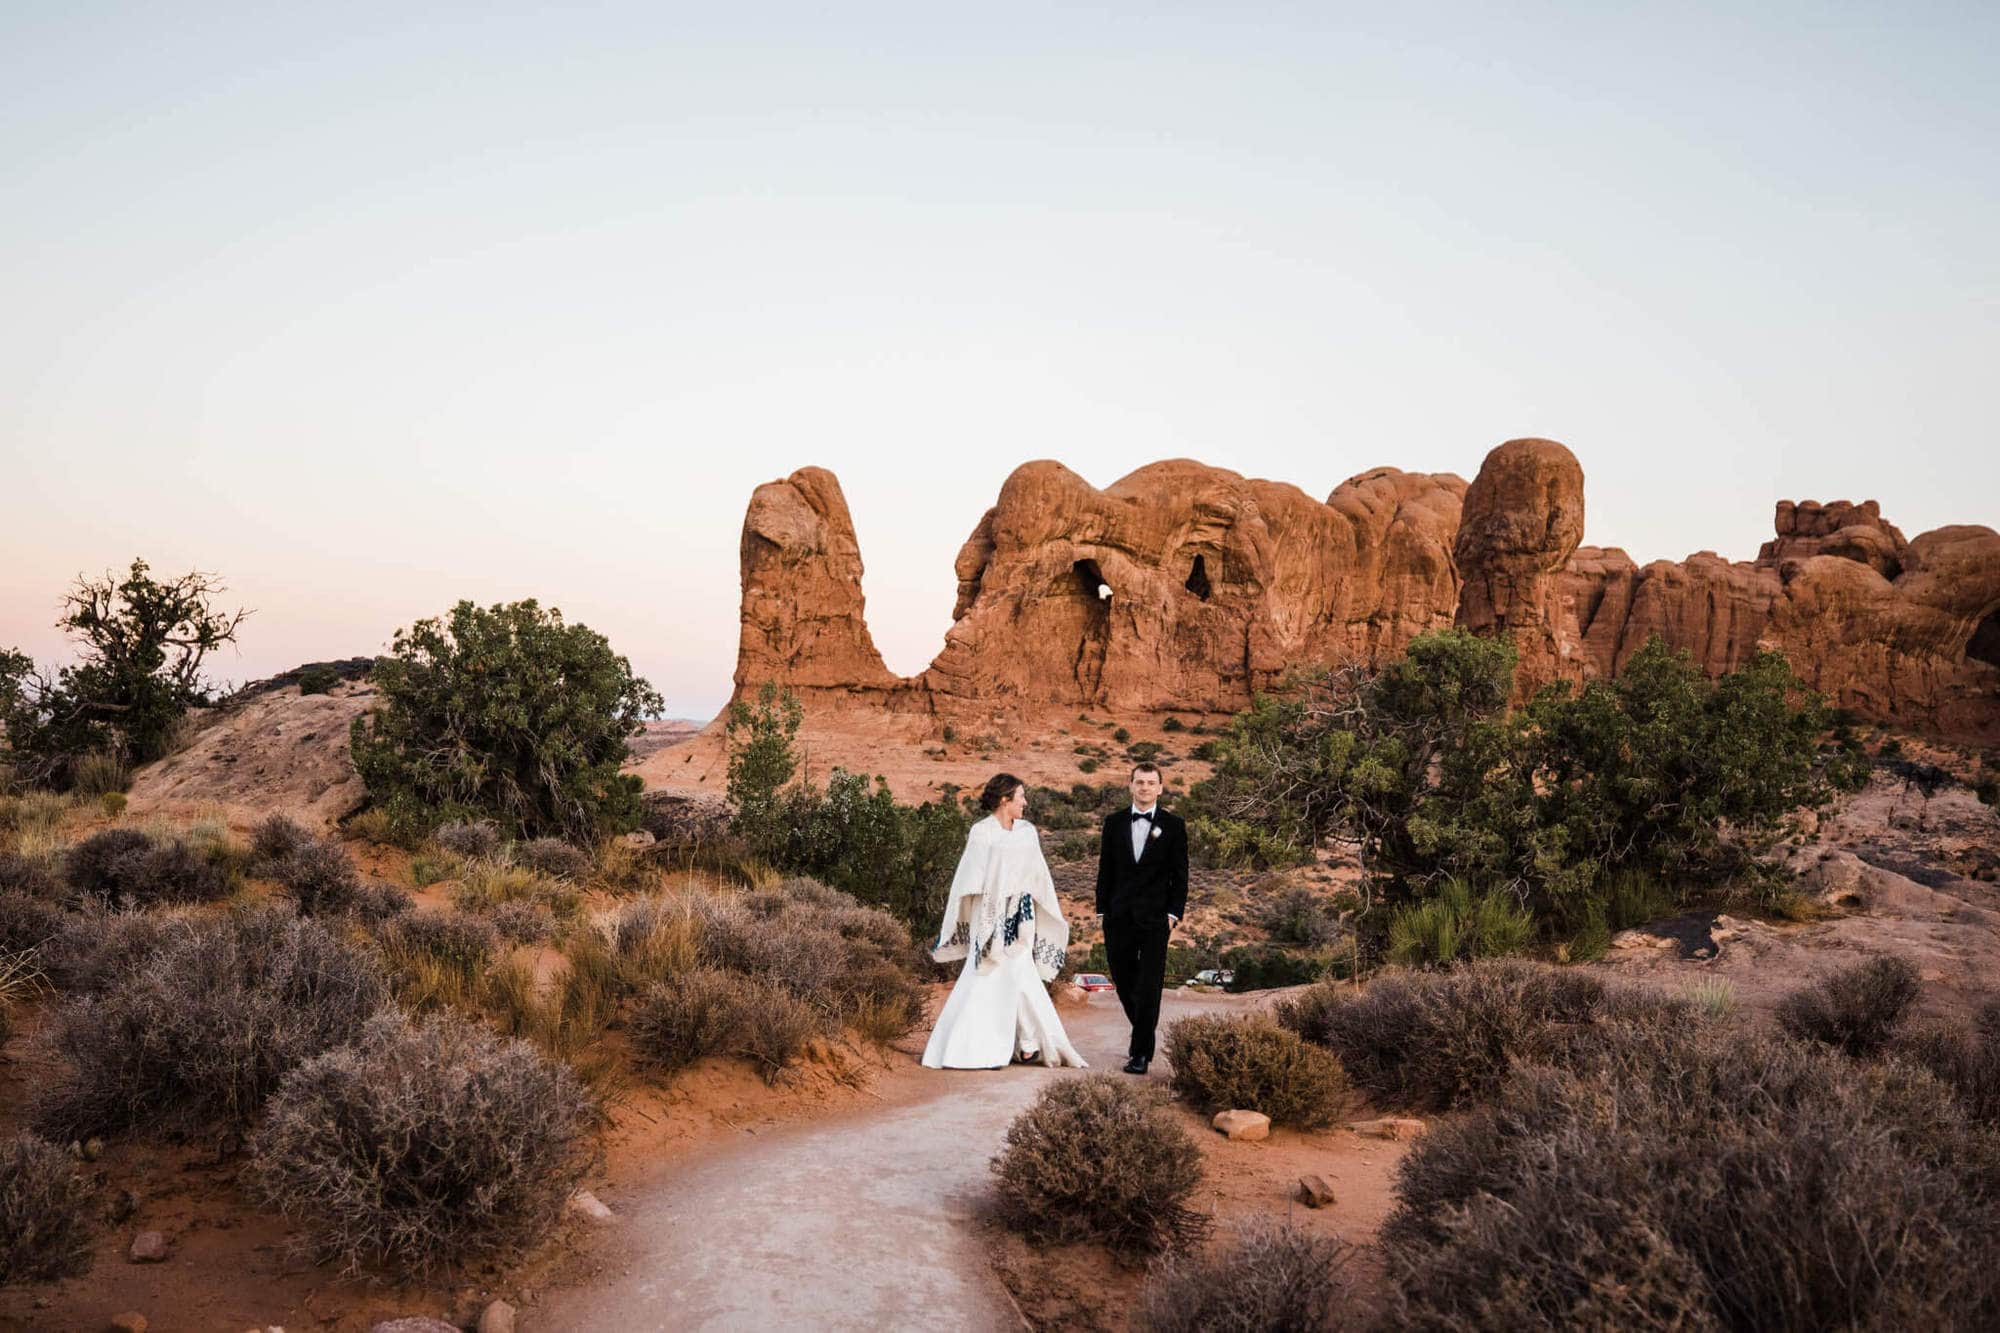 Bride and groom walk at sunrise for their Arches National Park wedding.